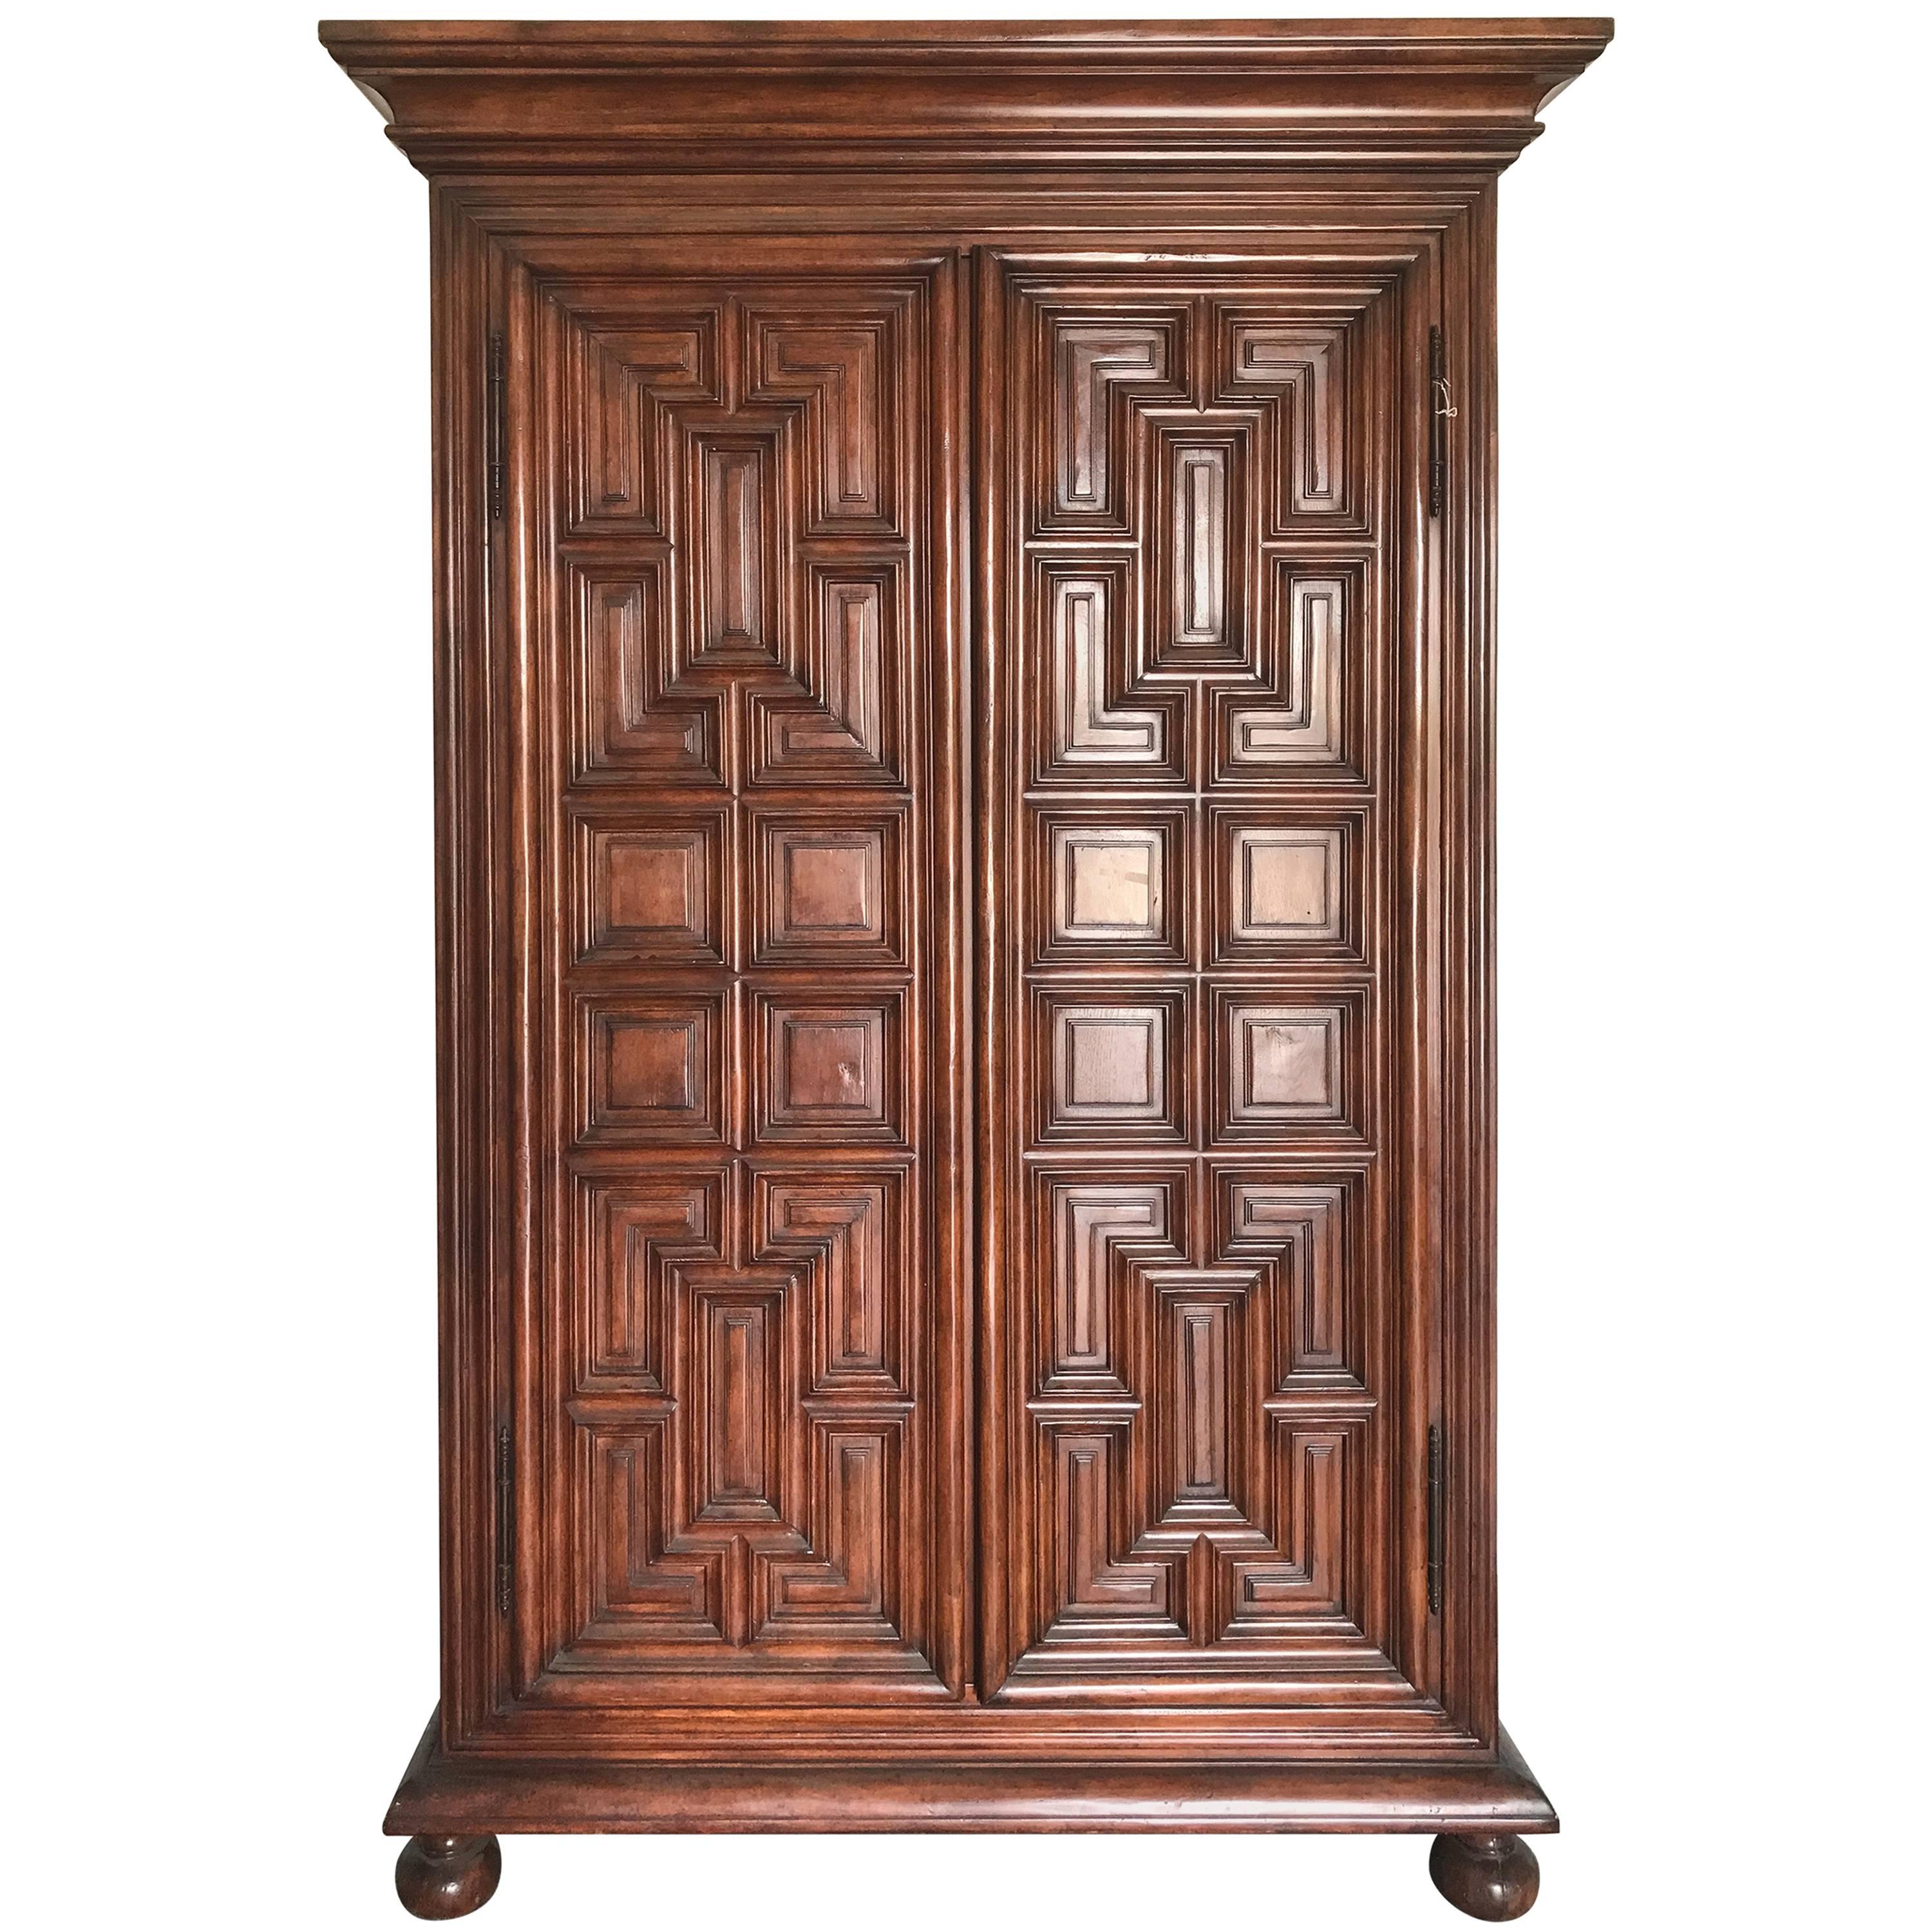 Geometric Armoire by Charles Pollock for the William Switzer Collection